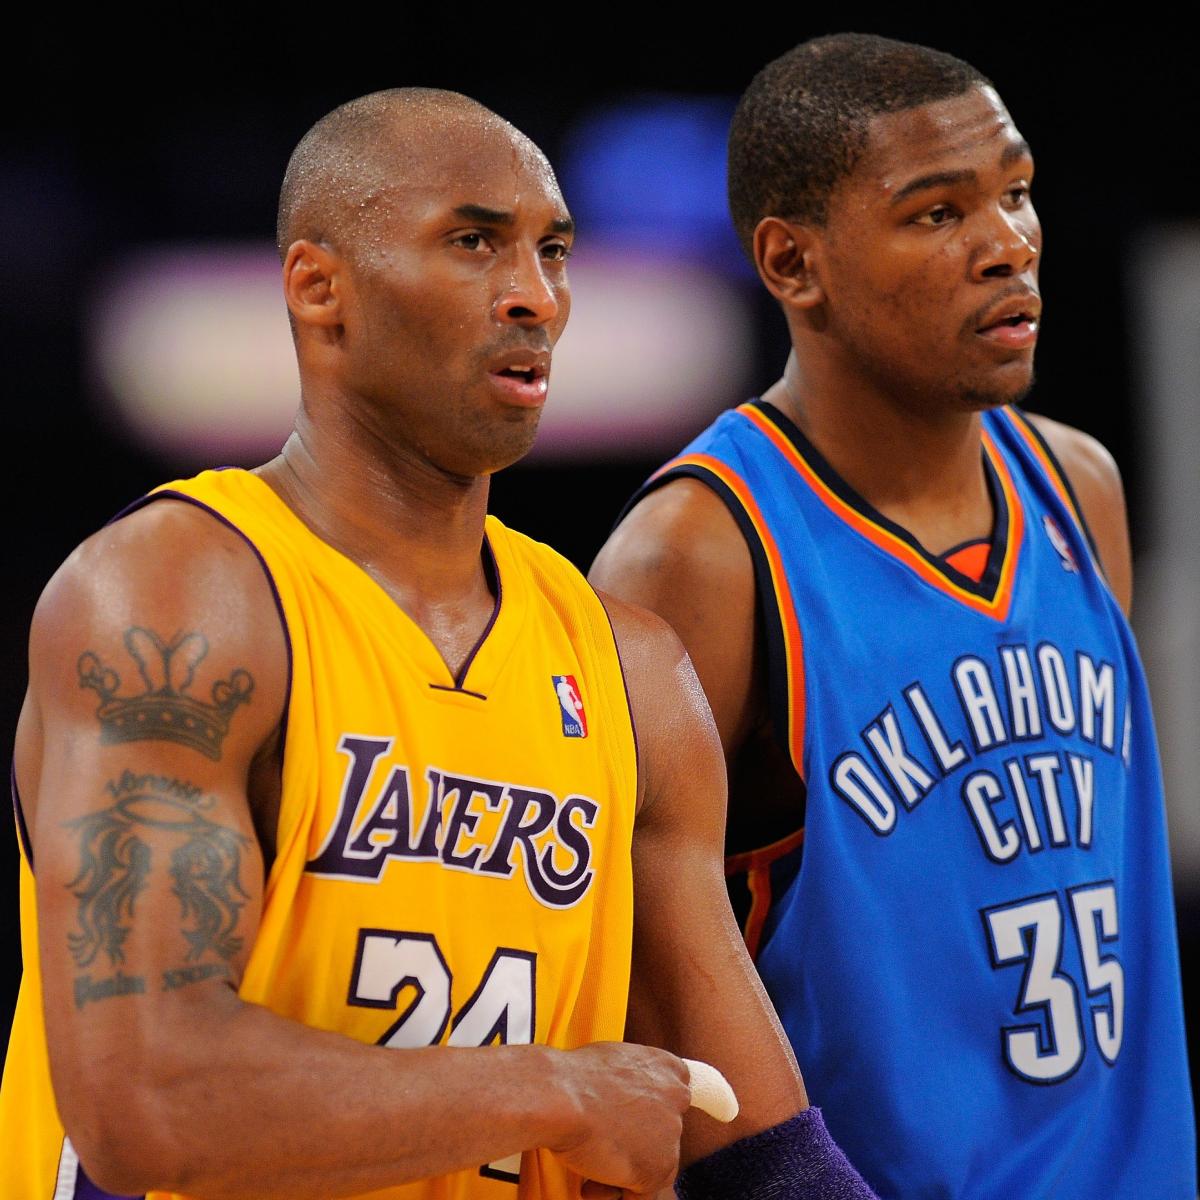 Lakers vs. Thunder: TV Schedule, Live Stream, Spread Info and More | Bleacher Report